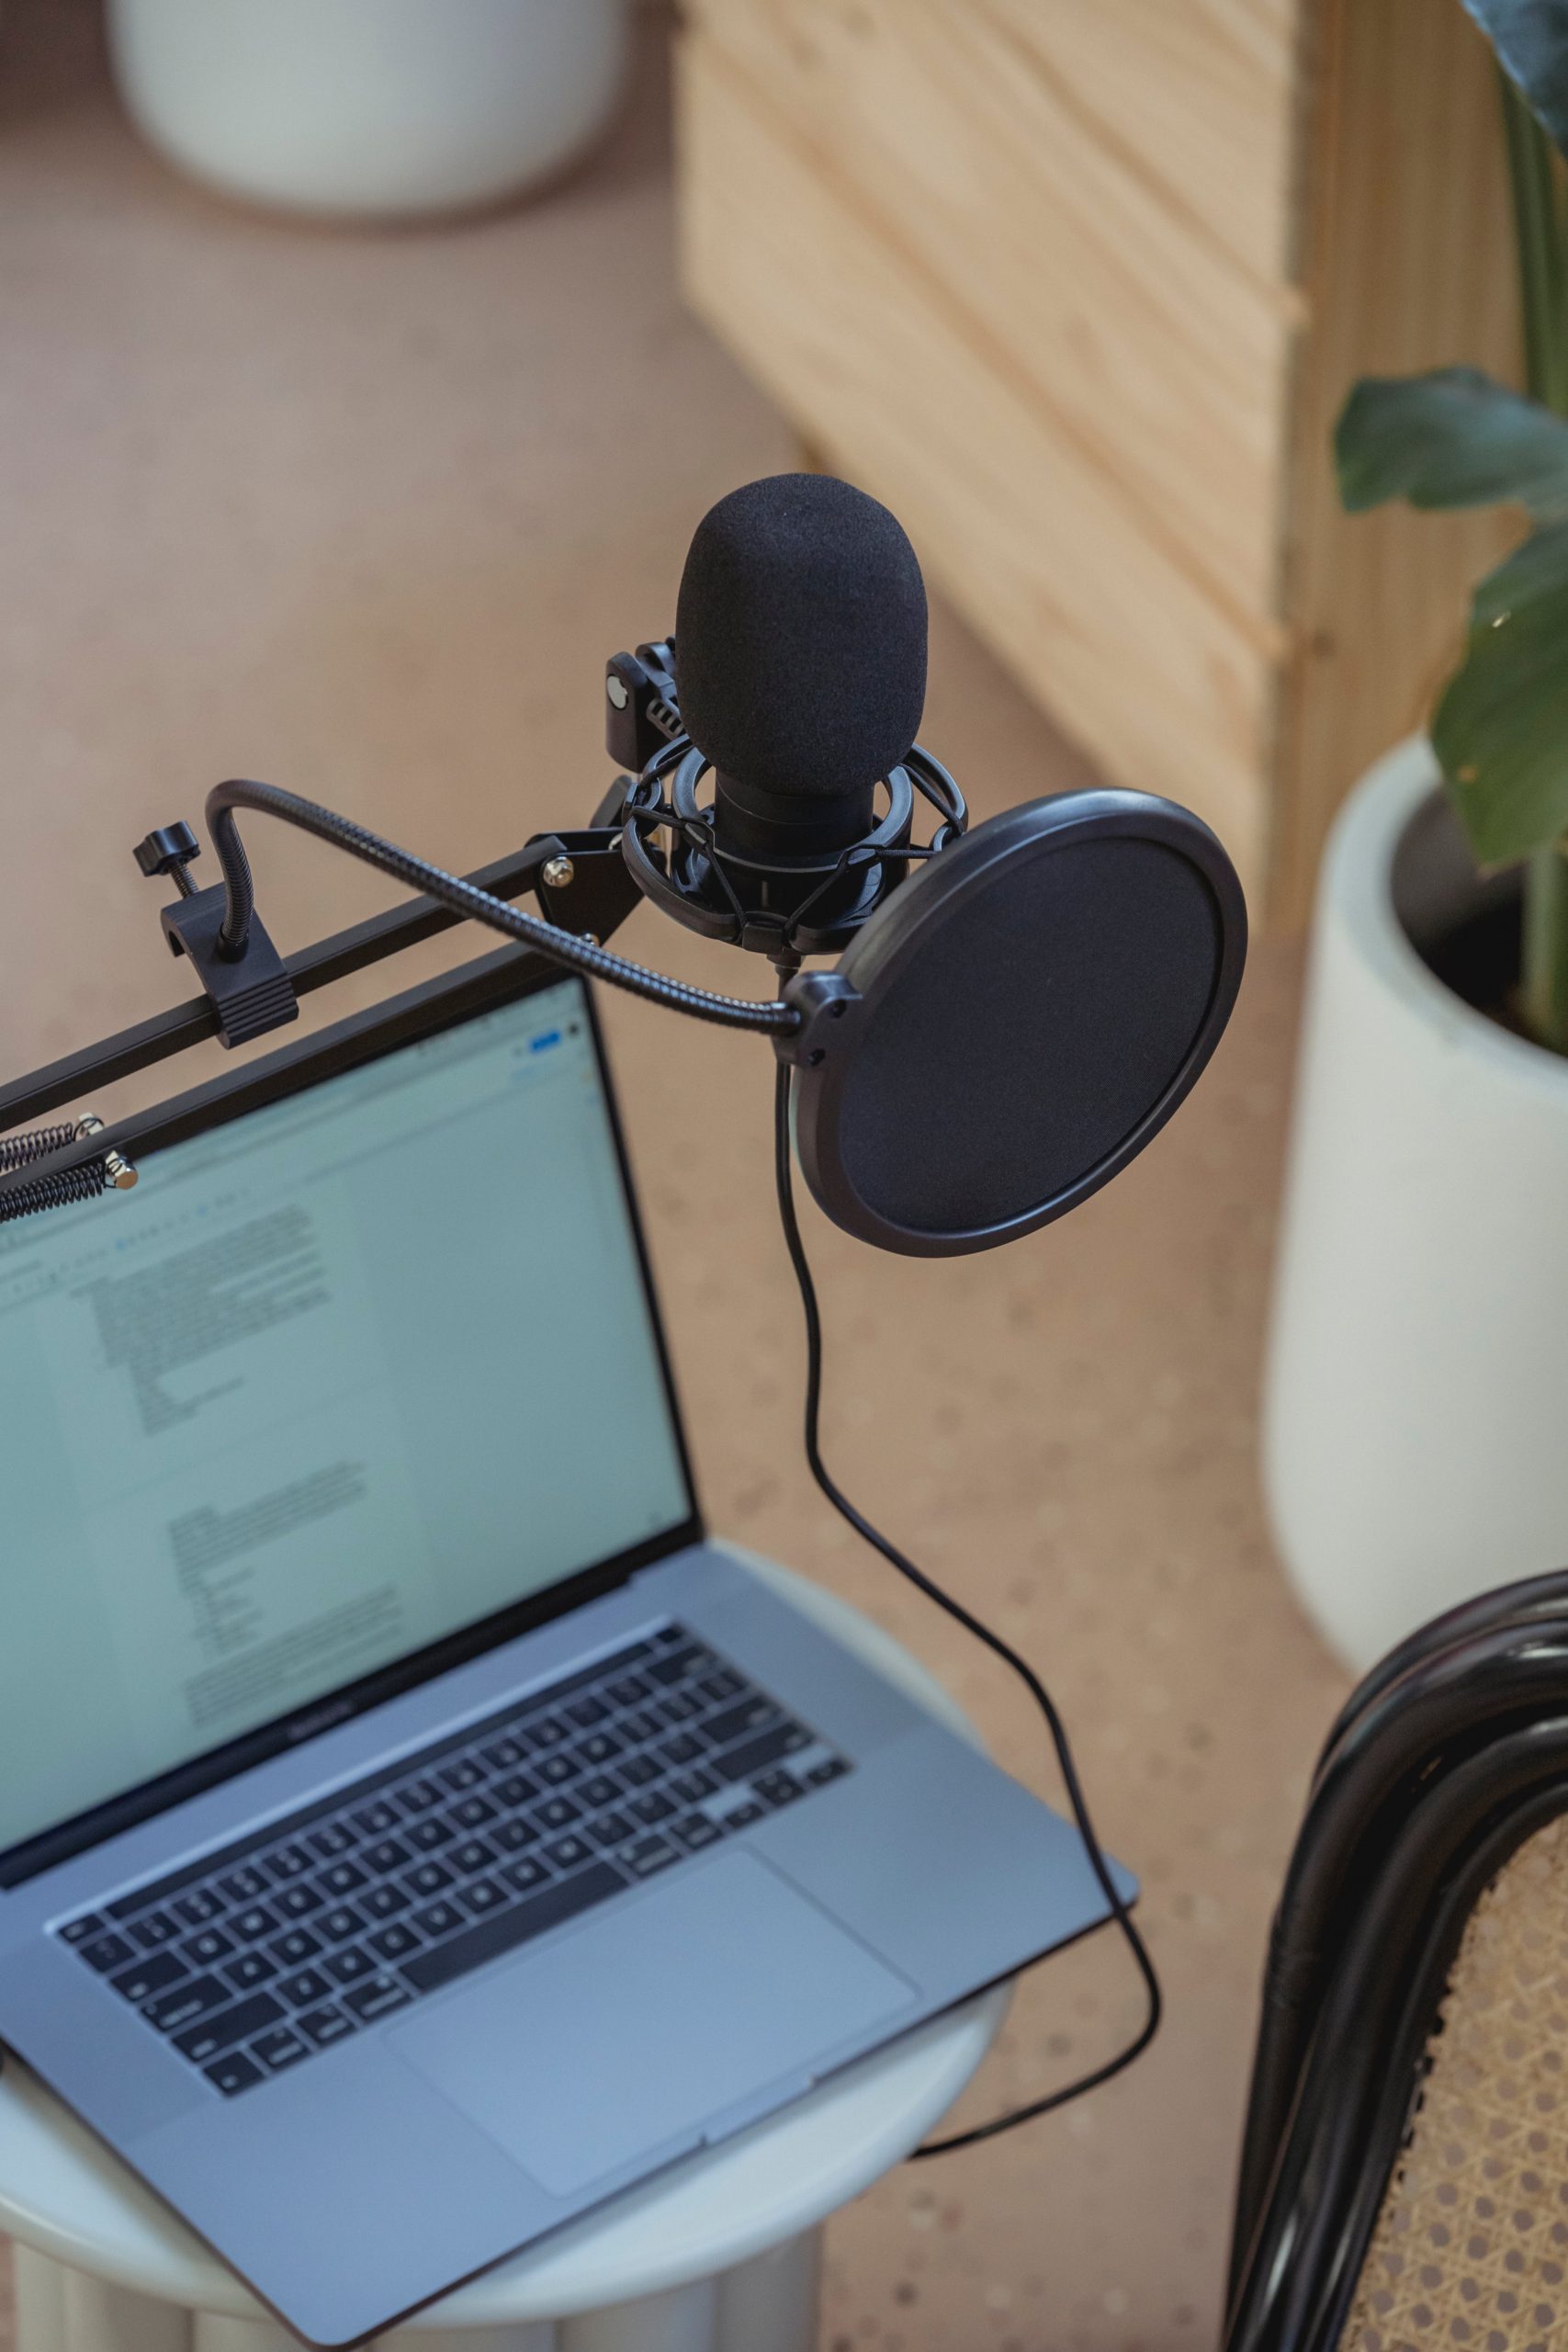 Top 3 Reasons Cakewalk By BandLab Is A Rising Star In Podcasting